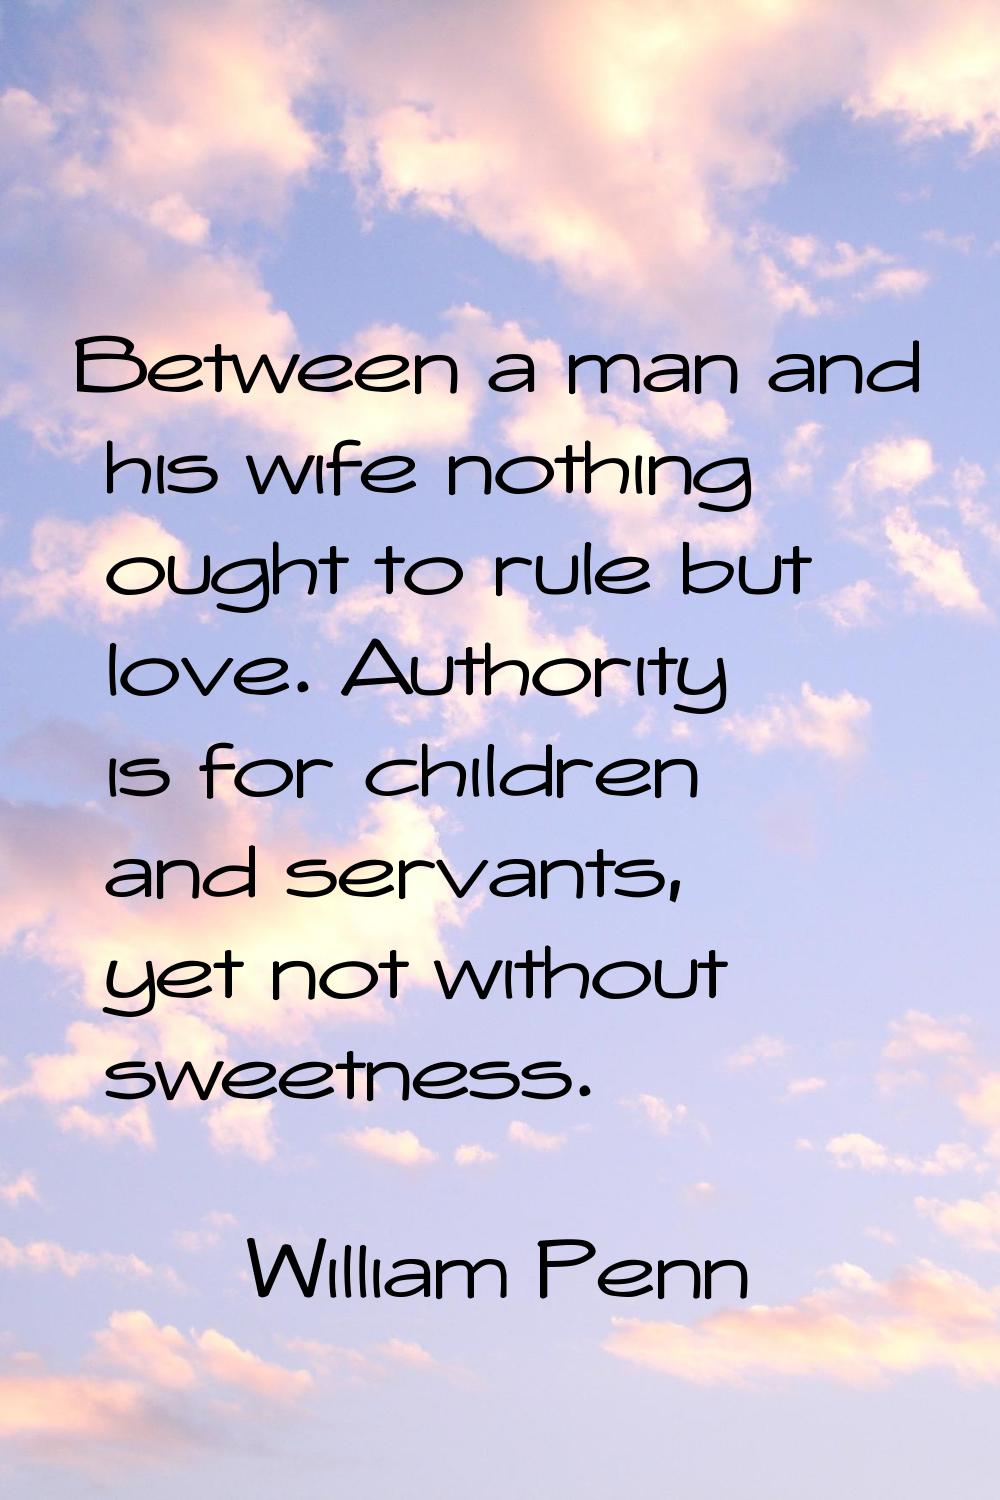 Between a man and his wife nothing ought to rule but love. Authority is for children and servants, 